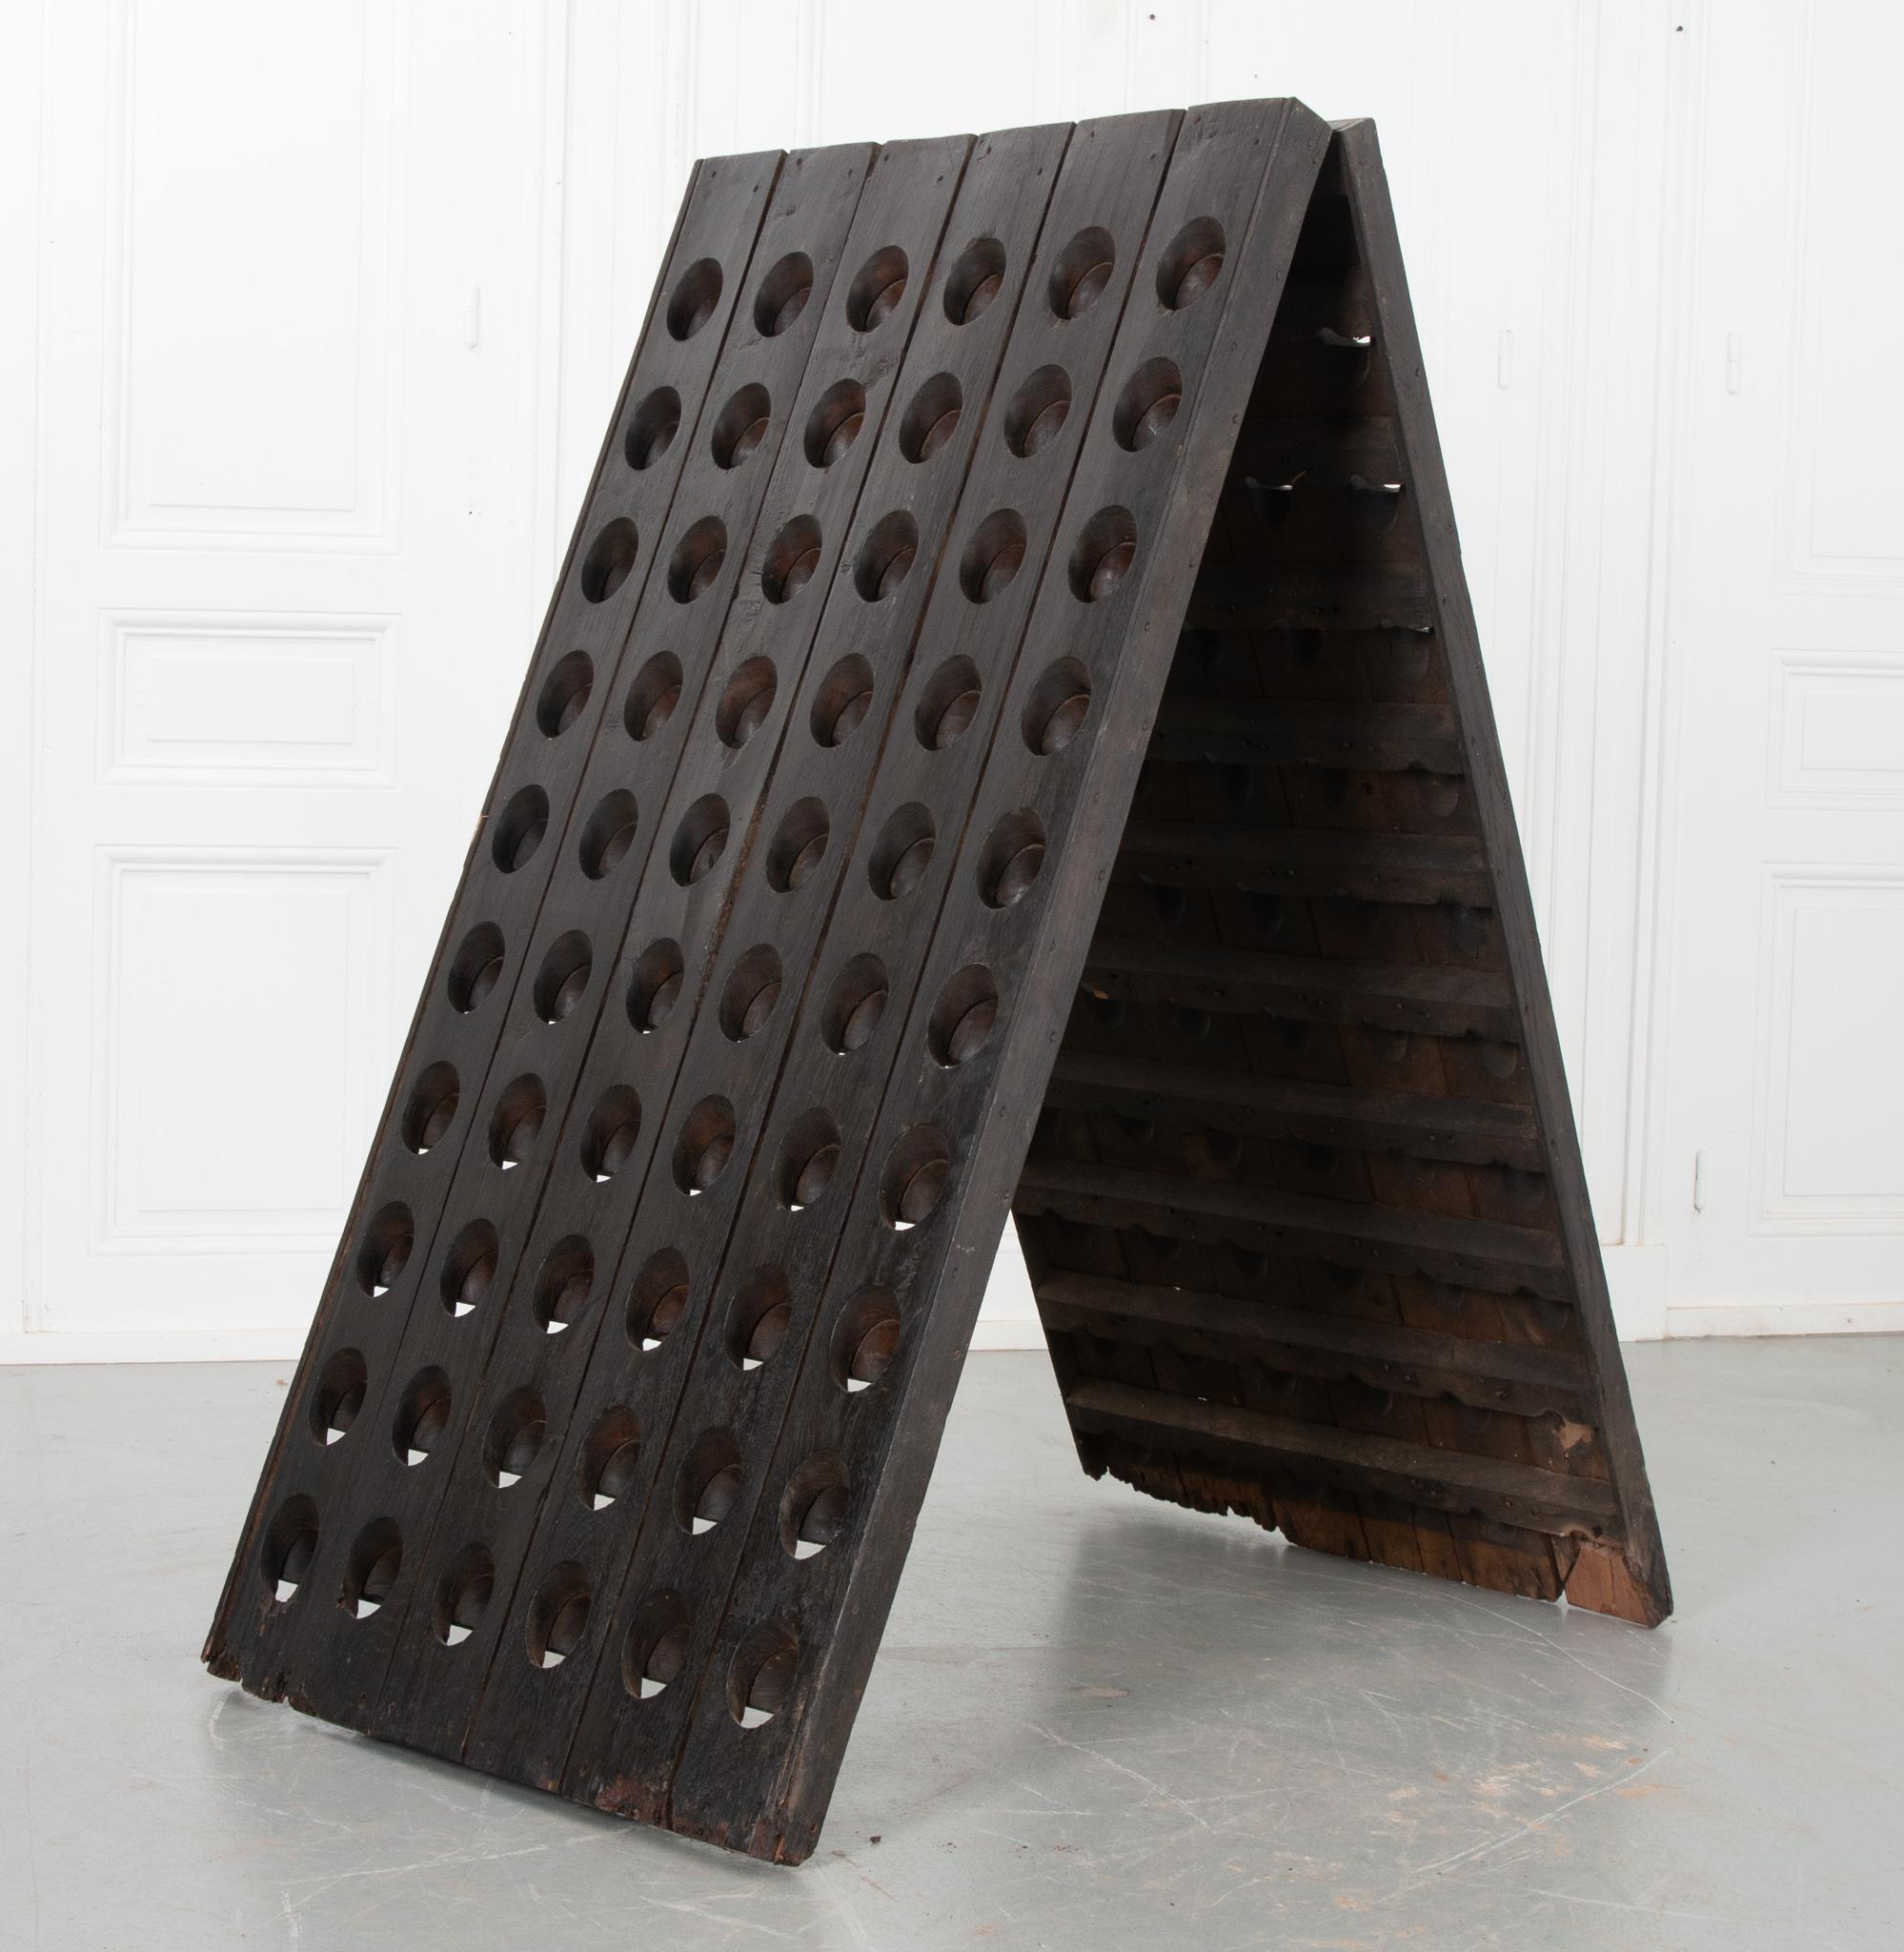 This is a riddling rack, a standing wooden A-frame rack that’s used in the process of making champagne. It has 120 holes that secure the bottles by the neck at an angle. This is one of the best ways to display a large selection of wine bottles. The